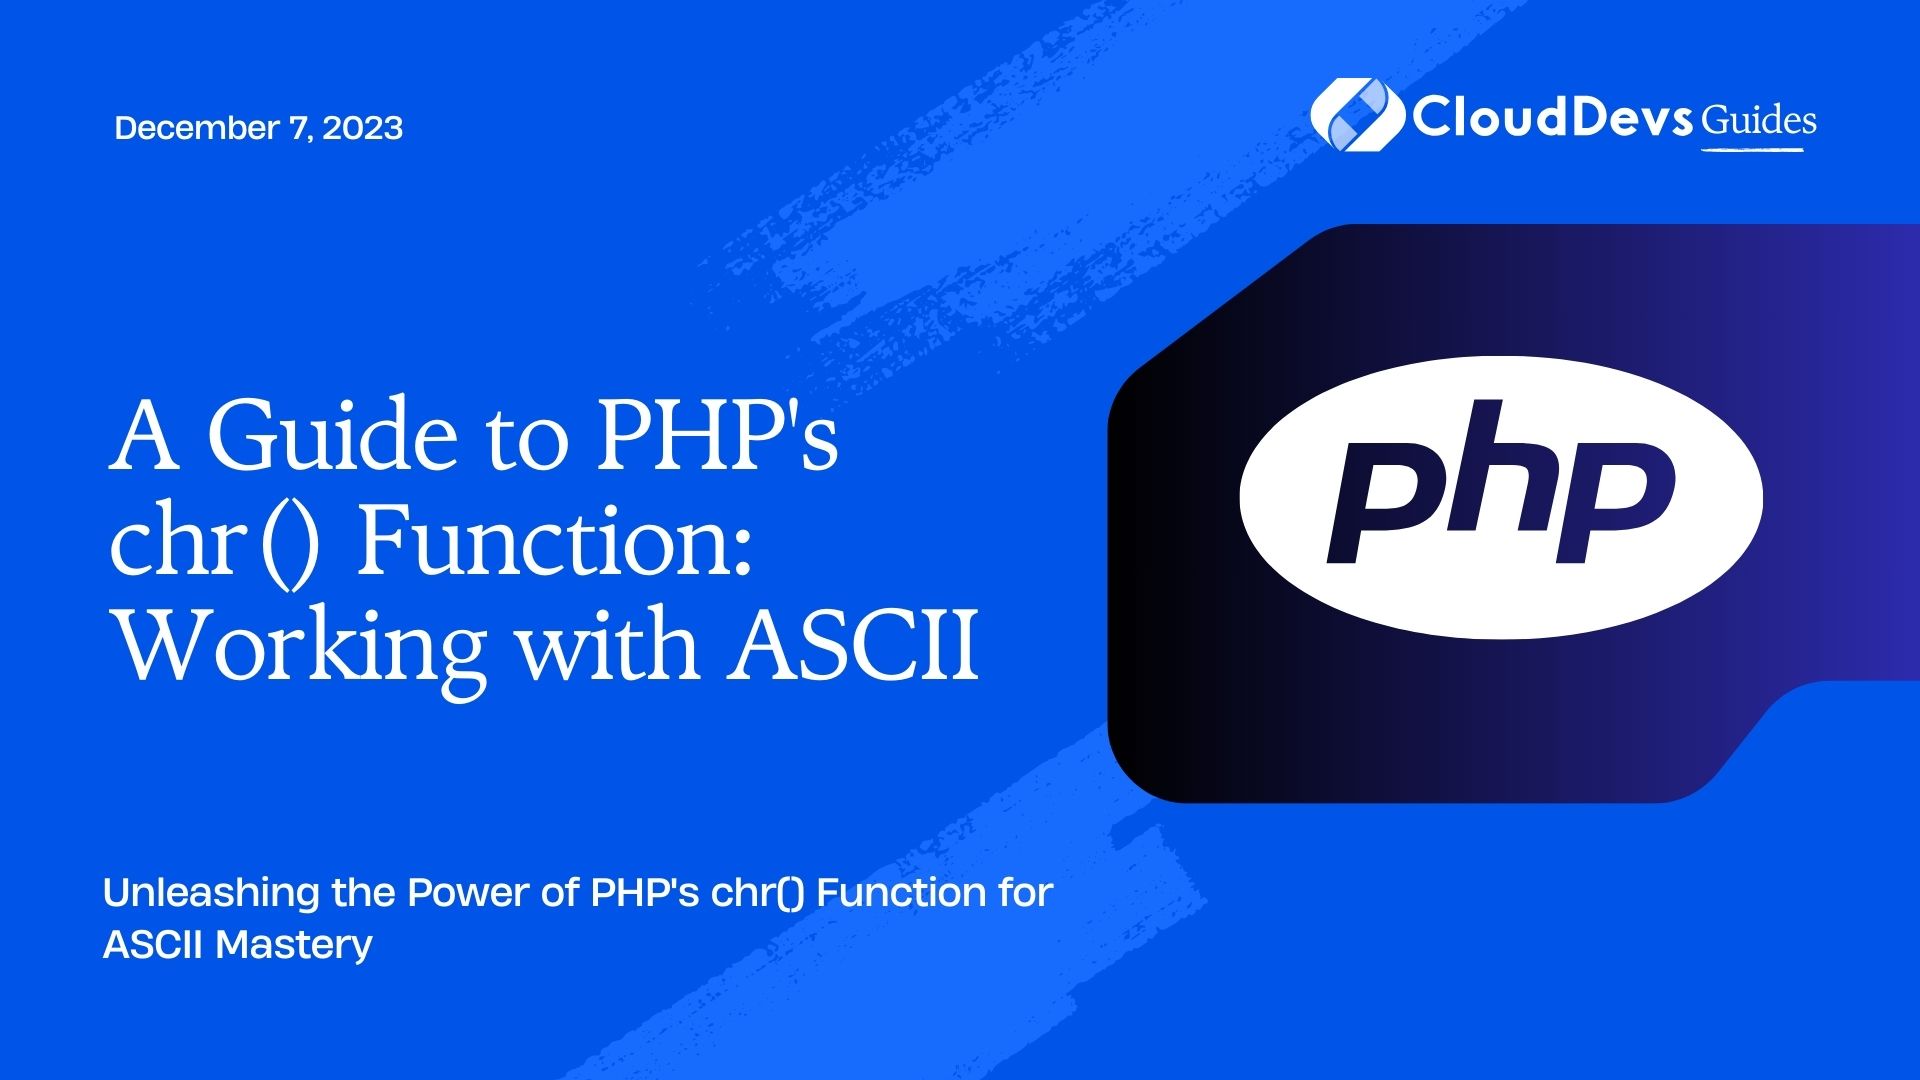 A Guide to PHP's chr() Function: Working with ASCII